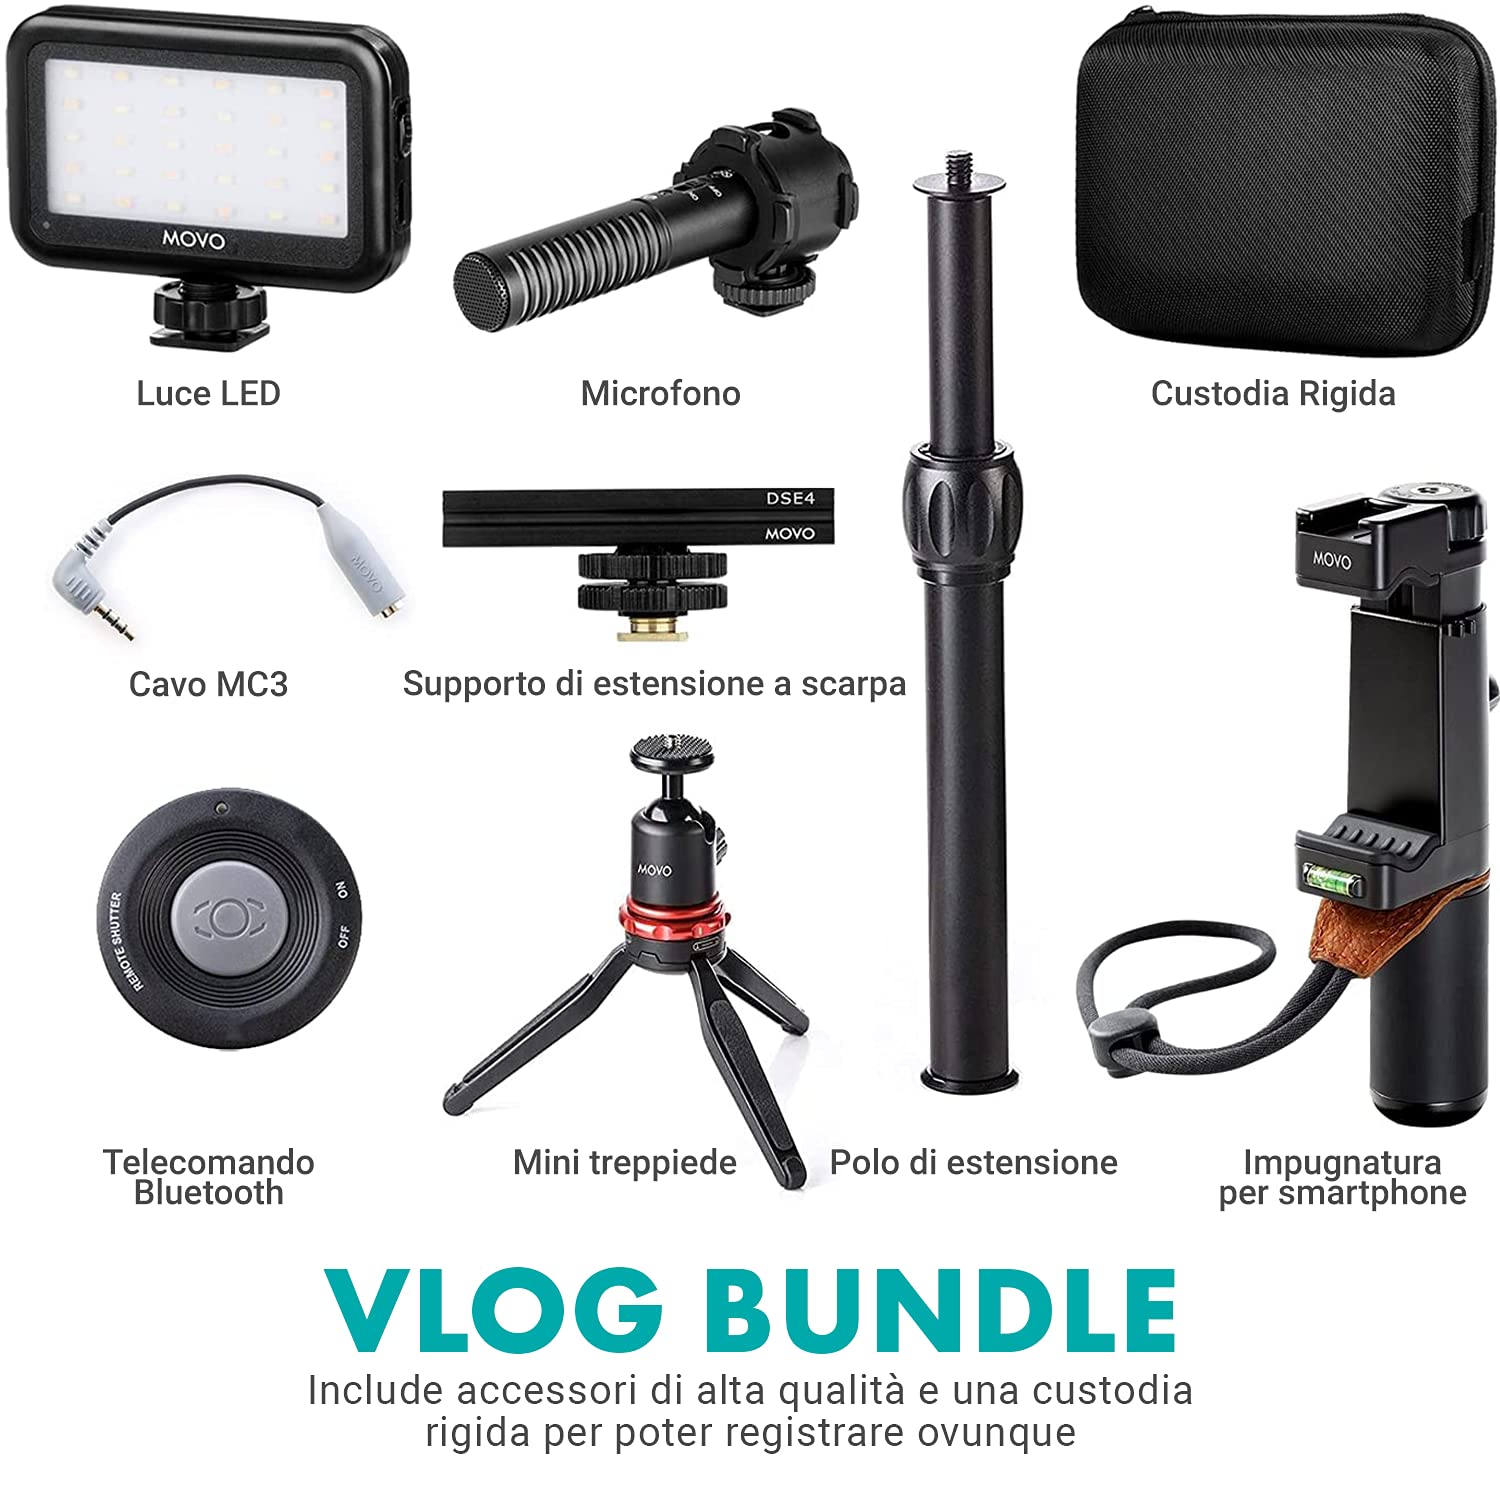 Movo V7+ YouTube Starter Kit - Vlogging Kit for iPhone with Tripod, Grip, Stereo Microphone, LED Light and Remote - Vlog Kit for iPhone 5, 5C, 5S, 6, 6S, 7, 8, X, XS or Samsung - iPhone Vlogging Kit  - Good